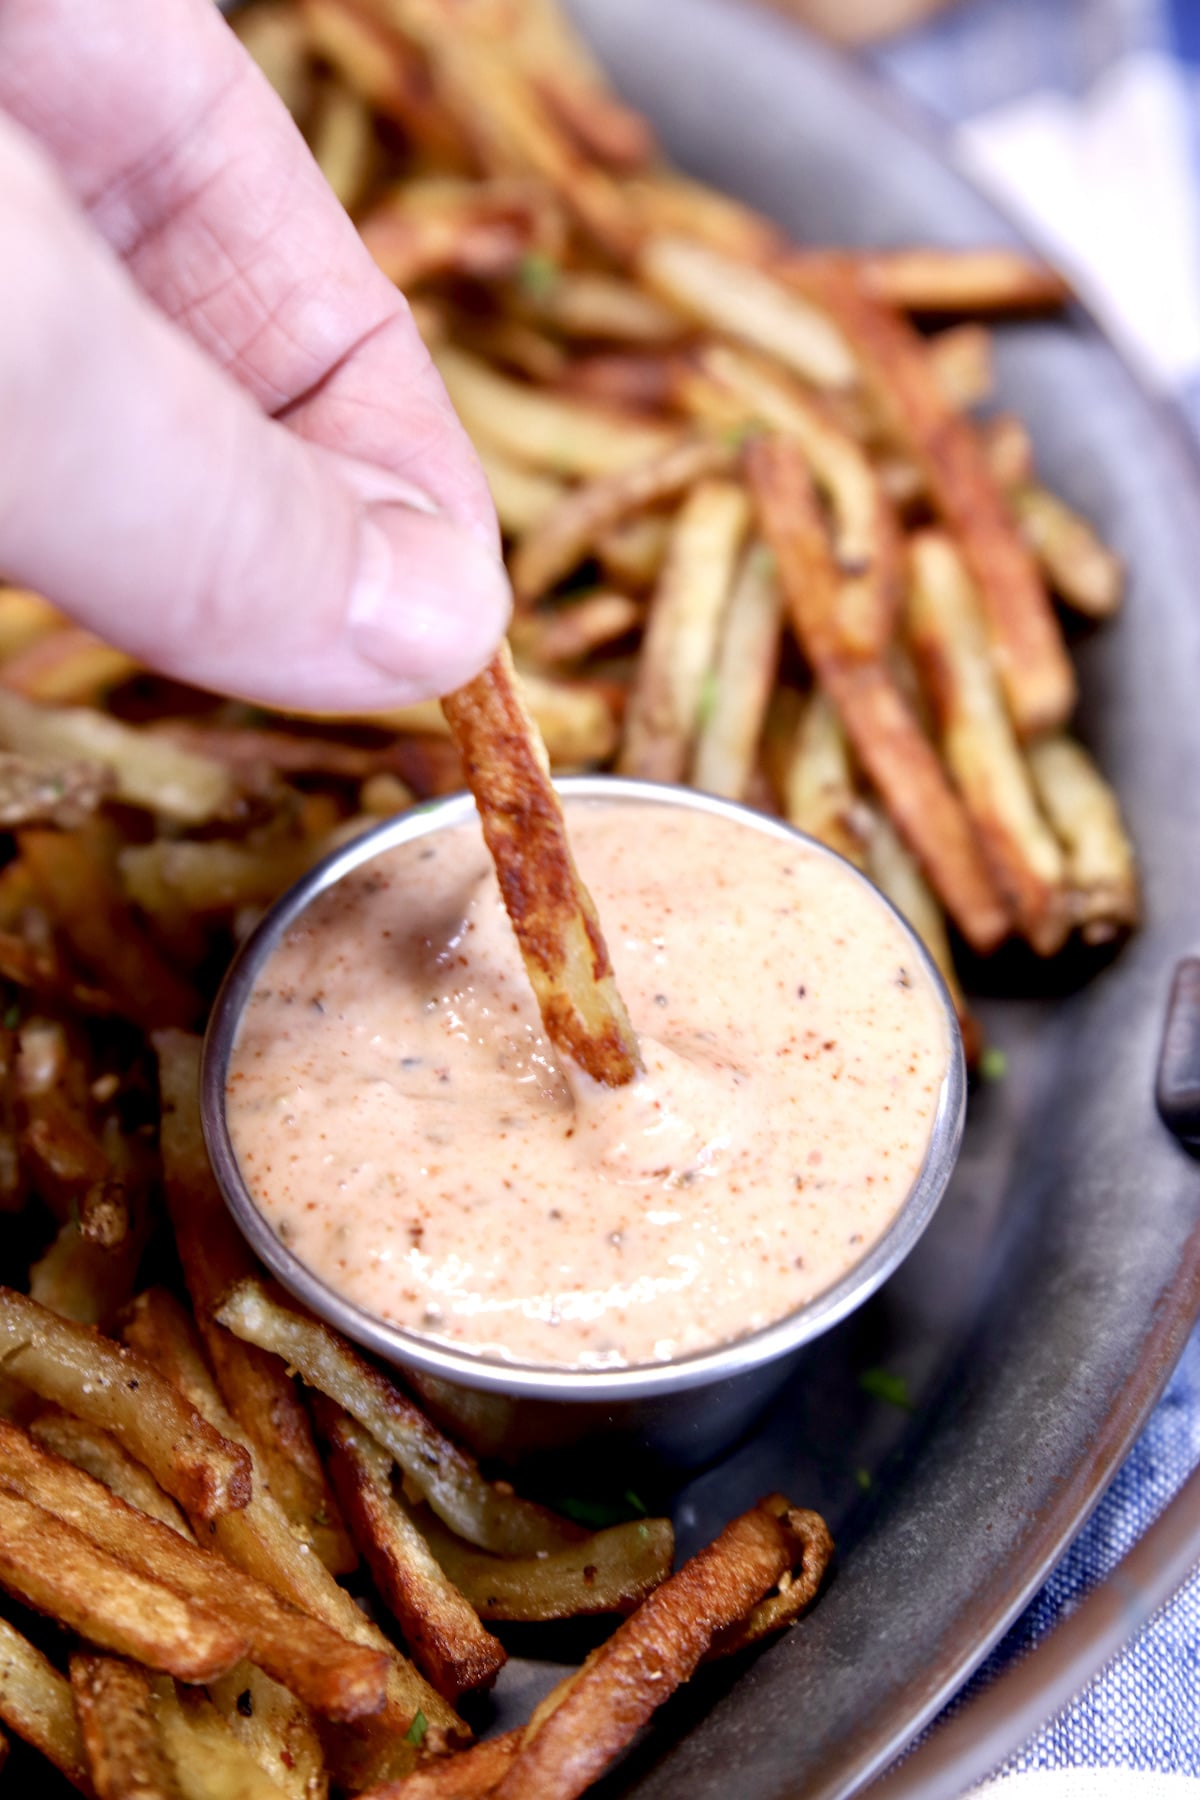 dipping fries in sauce on a tray.